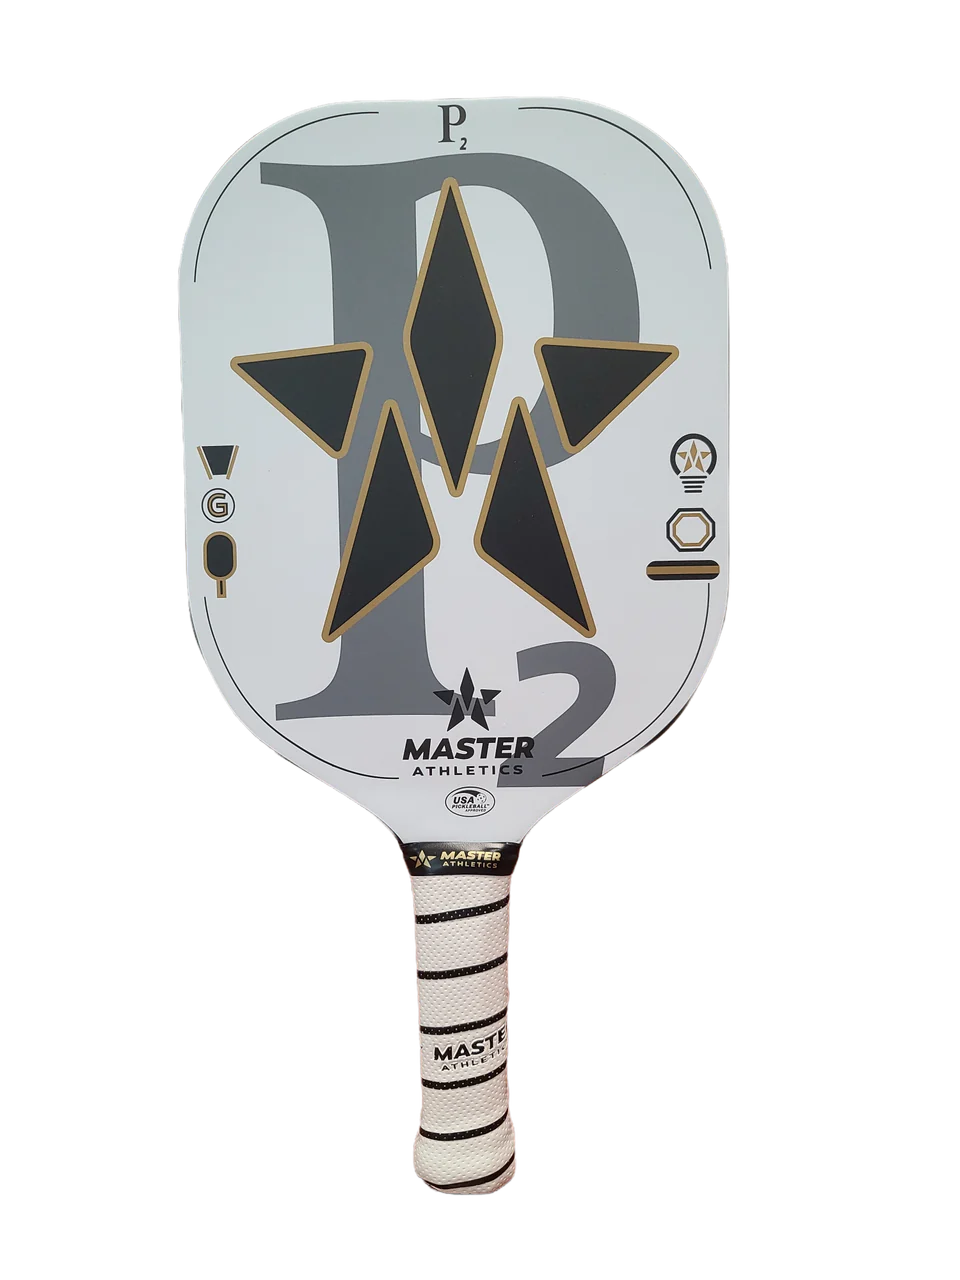 A Master Athletics P2 Pickleball Paddle with a star on it.